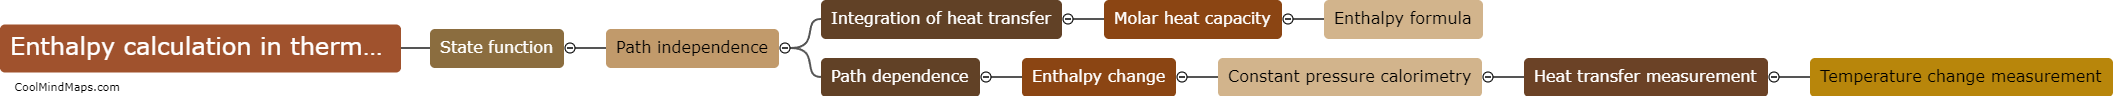 How is enthalpy calculated in thermodynamic processes?